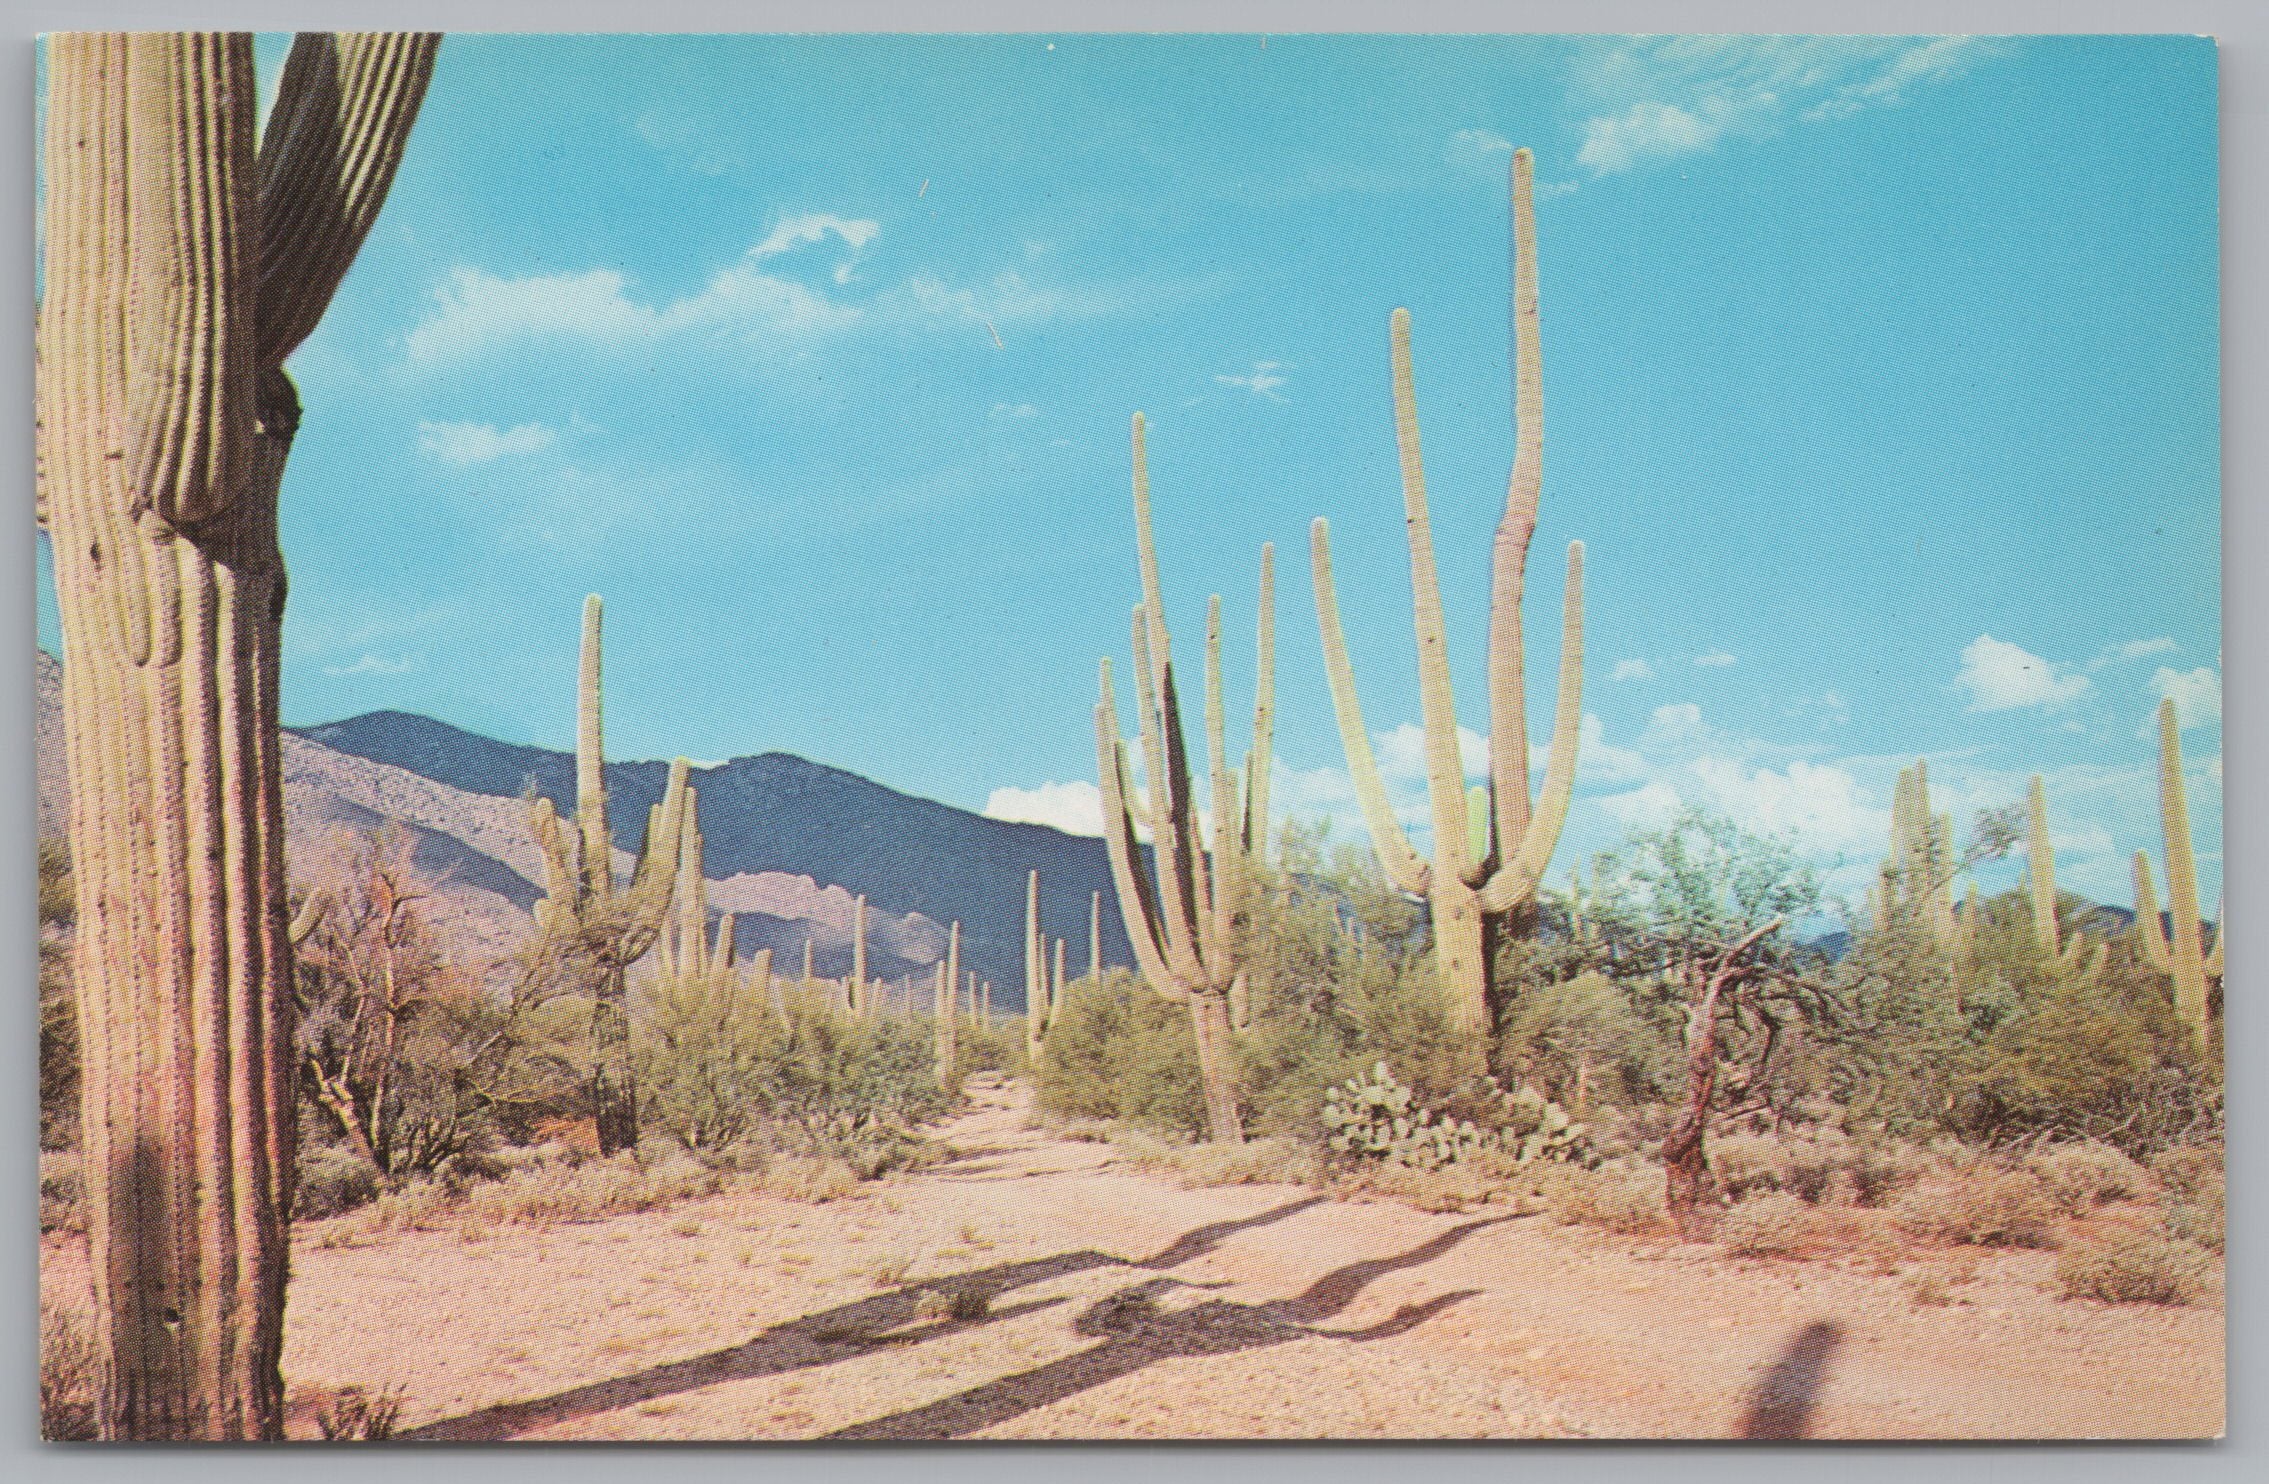 Cactus Against Scenic Mountain And Blue Sky, Vintage Post Card.